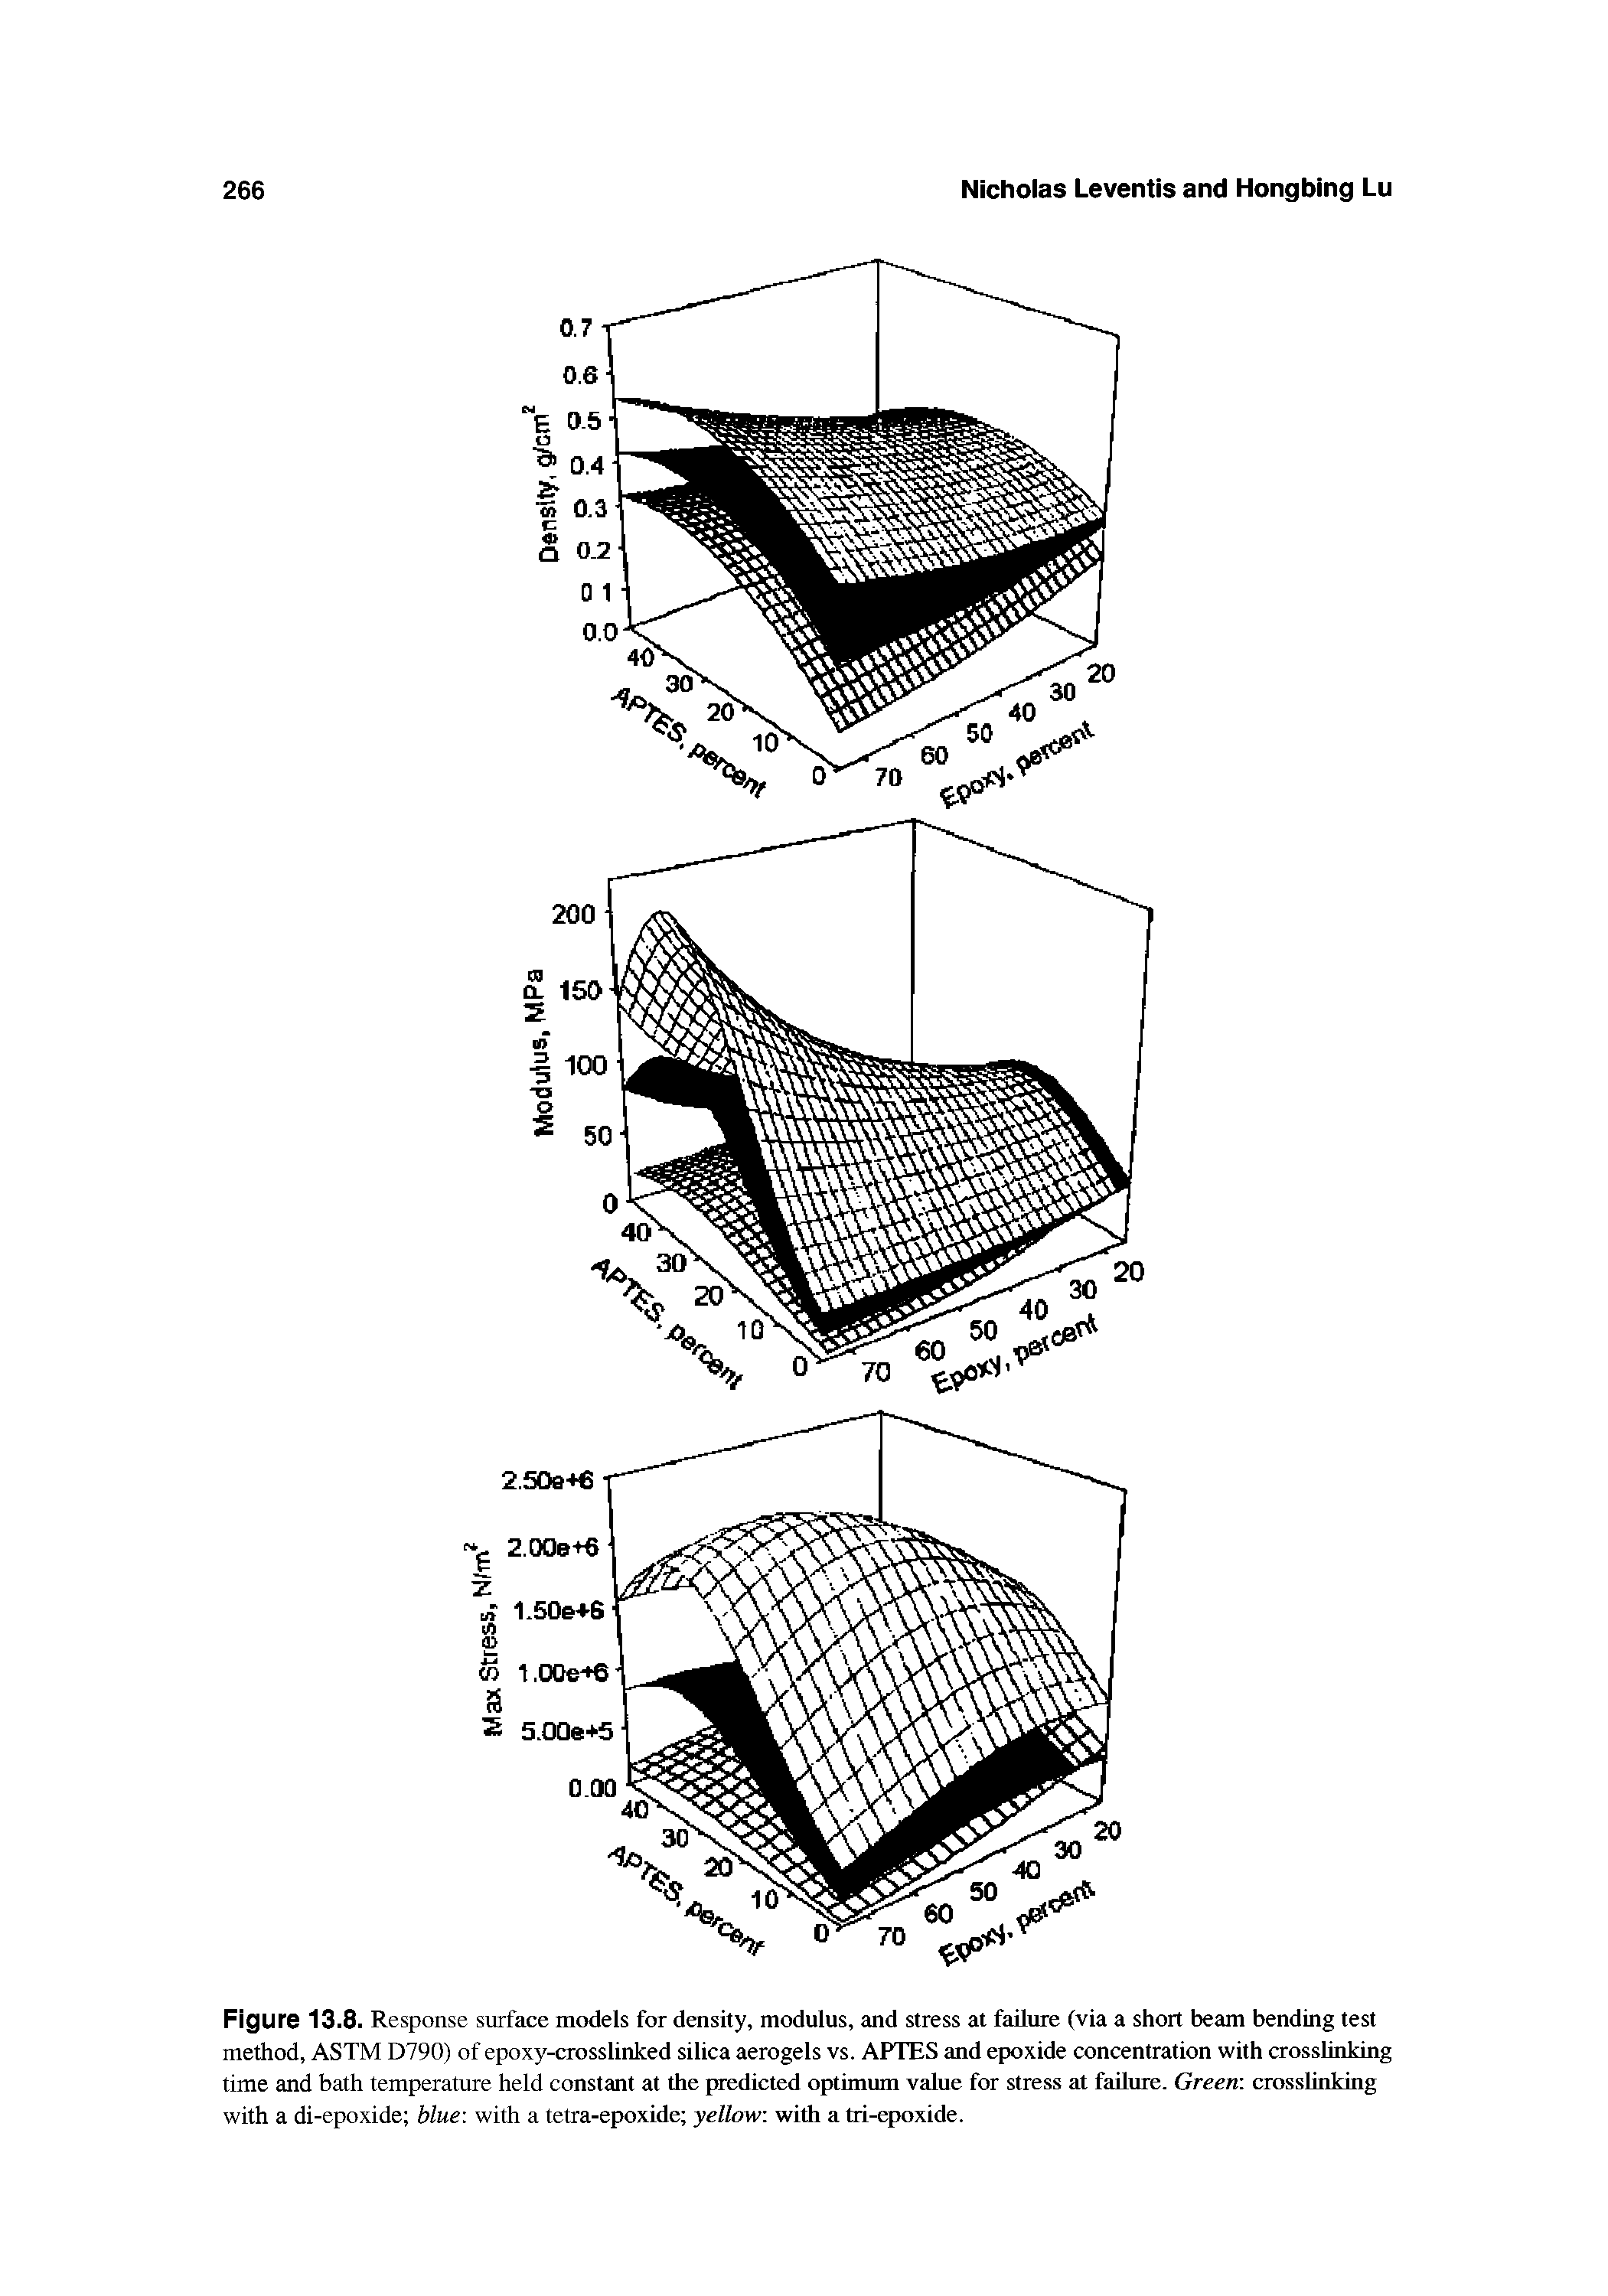 Figure 13.8. Response surface models for density, modulus, and stress at failure (via a short beam bending test method, ASTM D790) of epoxy-crosslinked silica aerogels vs. APTES and epoxide concentration with crosshnking time and bath temperature held constant at the predicted optimum value for stress at failure. Green crosshnking with a di-epoxide blue with a tetra-epoxide yellow with a tri-epoxide.